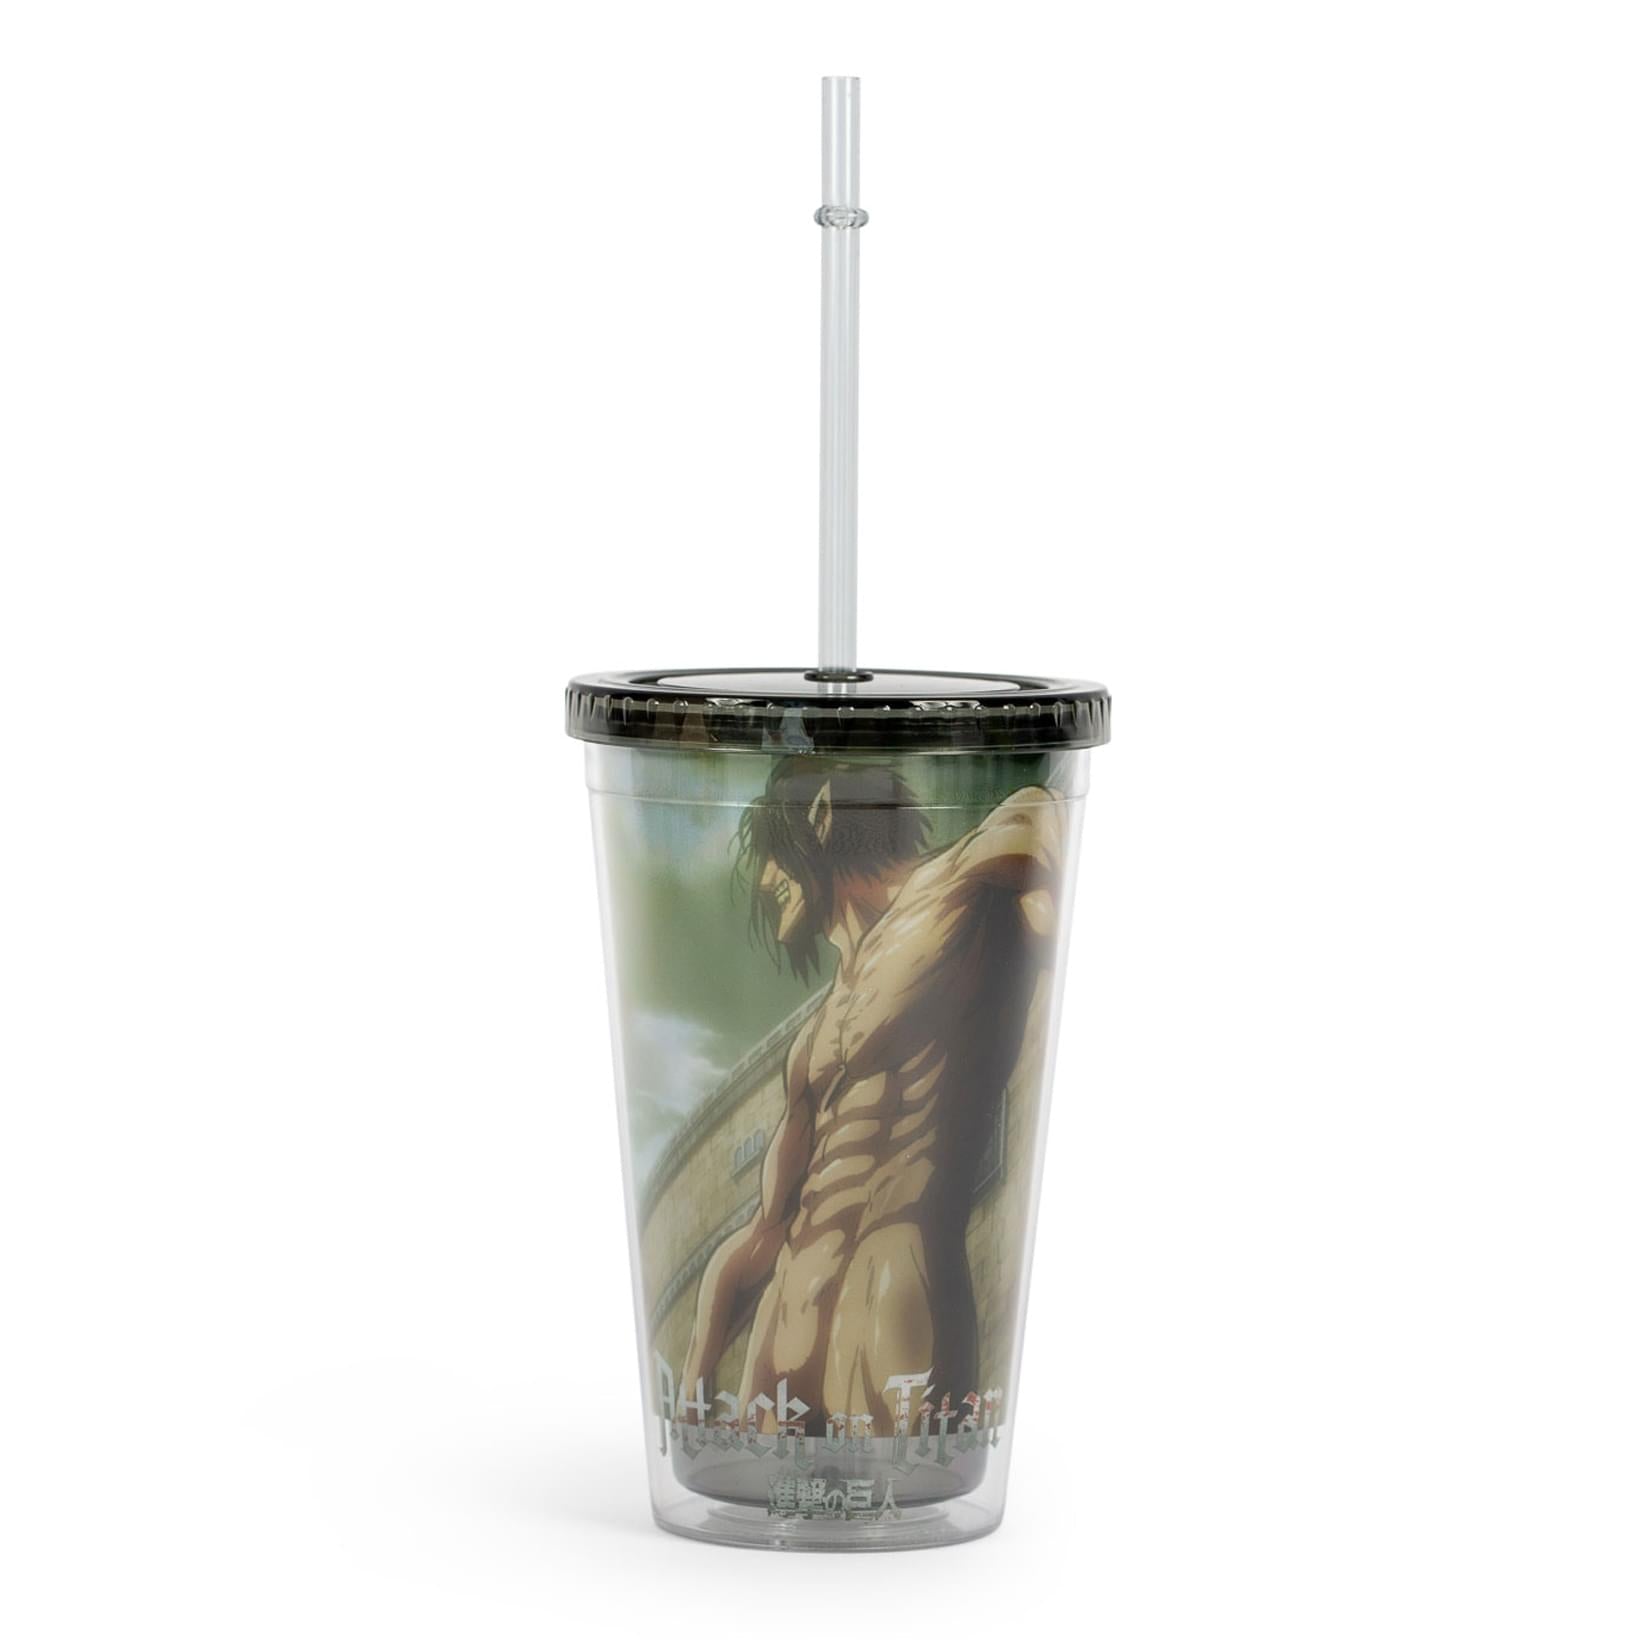 Attack On Titan Eren Yeager Titan Carnival Cup With Straw , Holds 16 Ounces